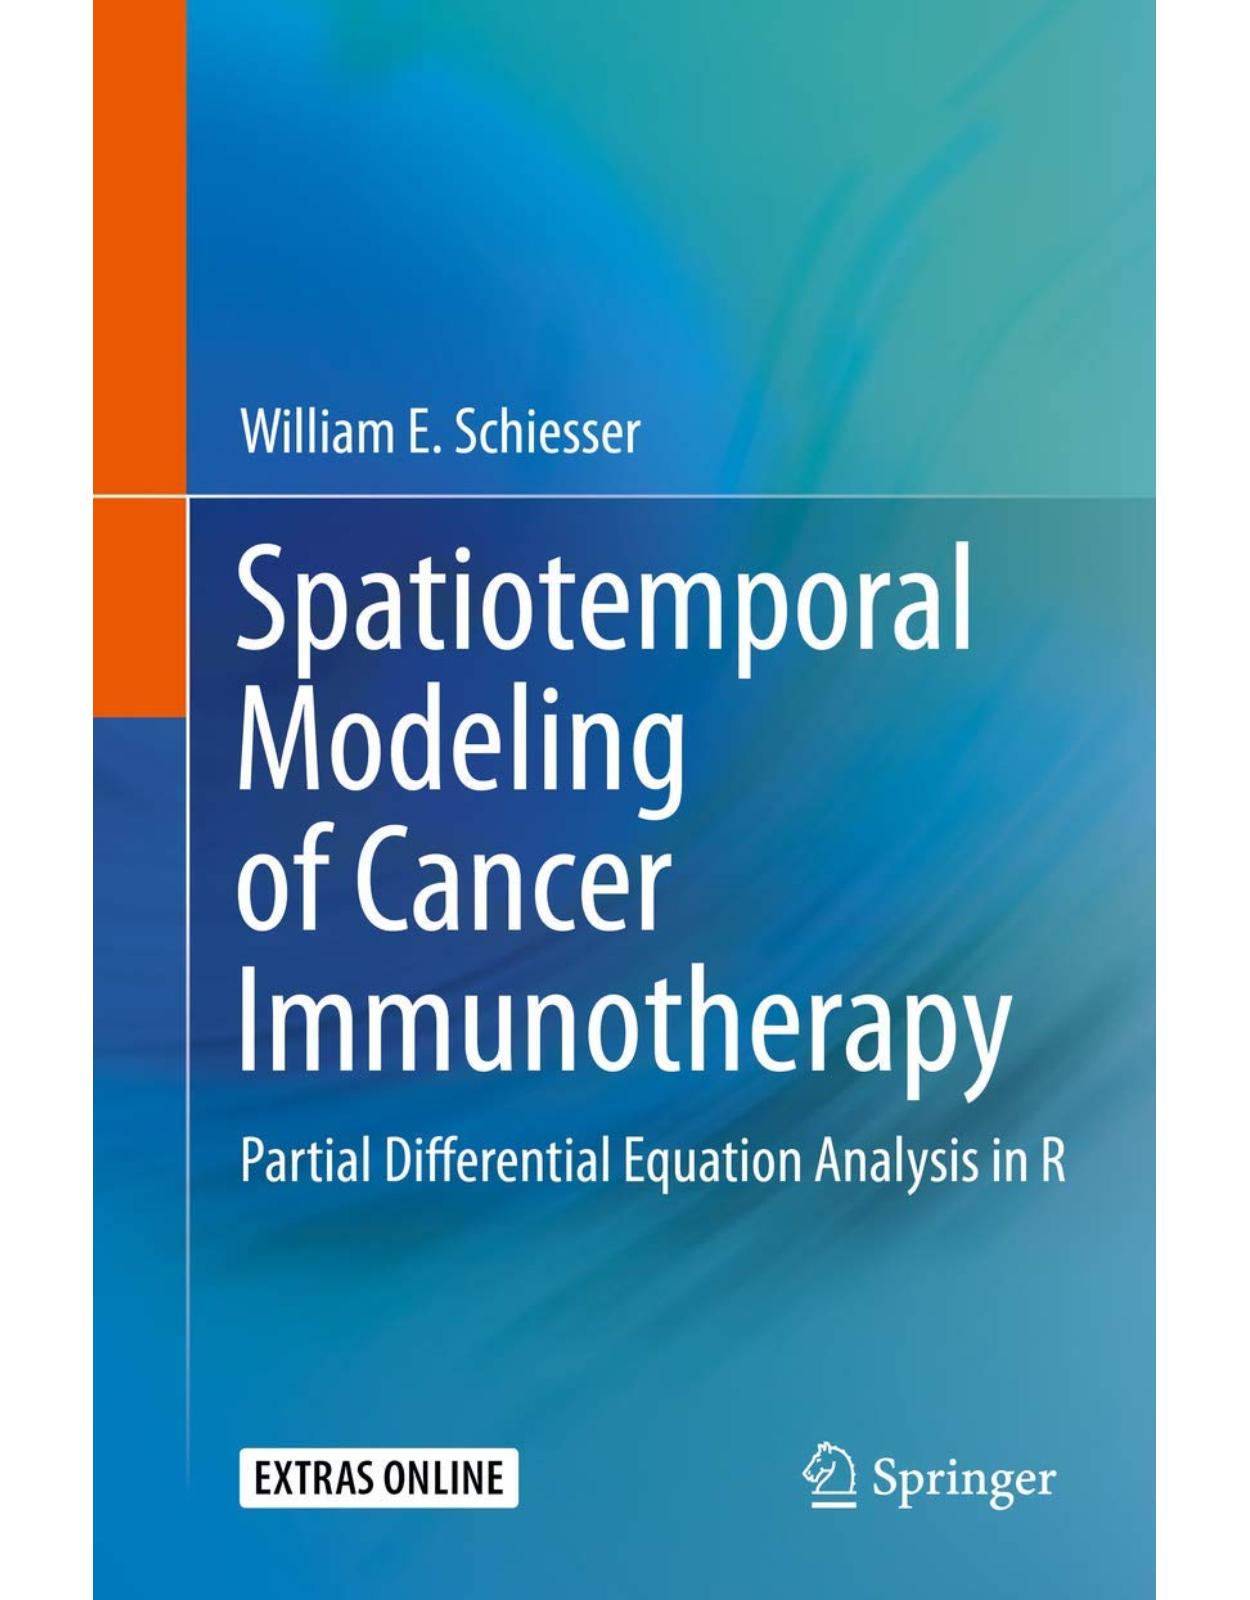 Spatiotemporal Modeling of Cancer Immunotherapy. Partial Differential Equation Analysis in R